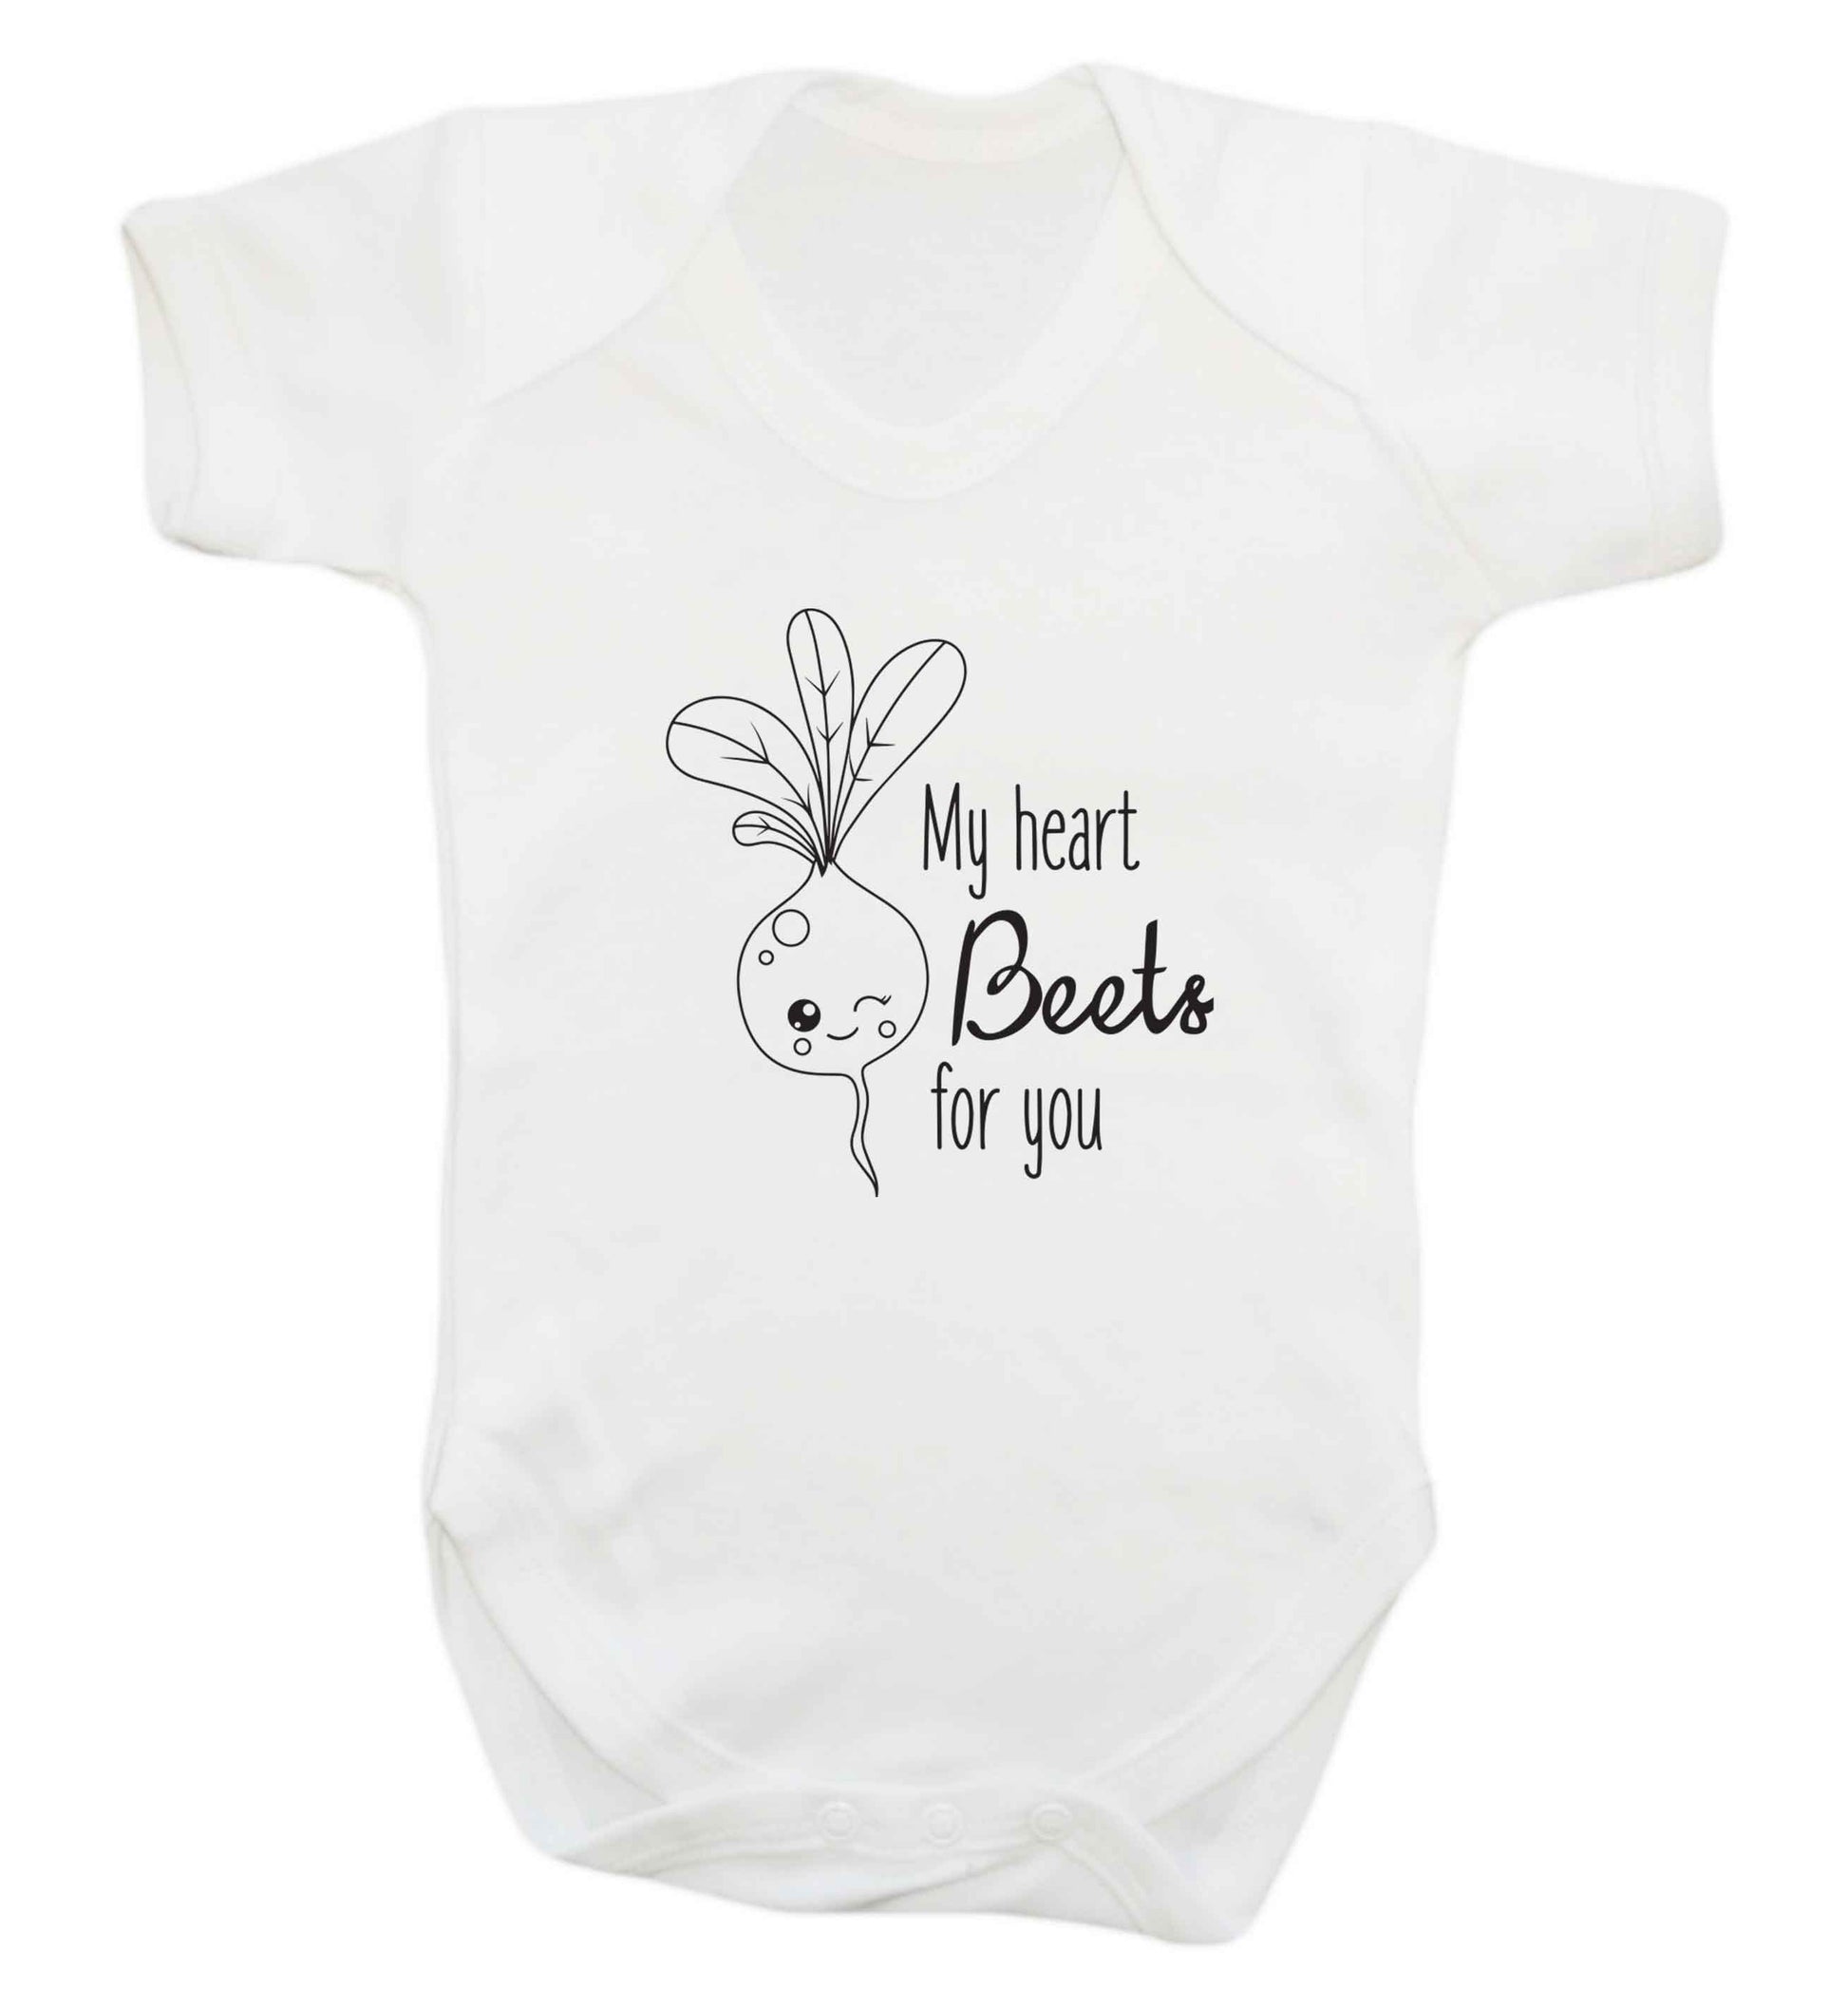 My heart beets for you baby vest white 18-24 months